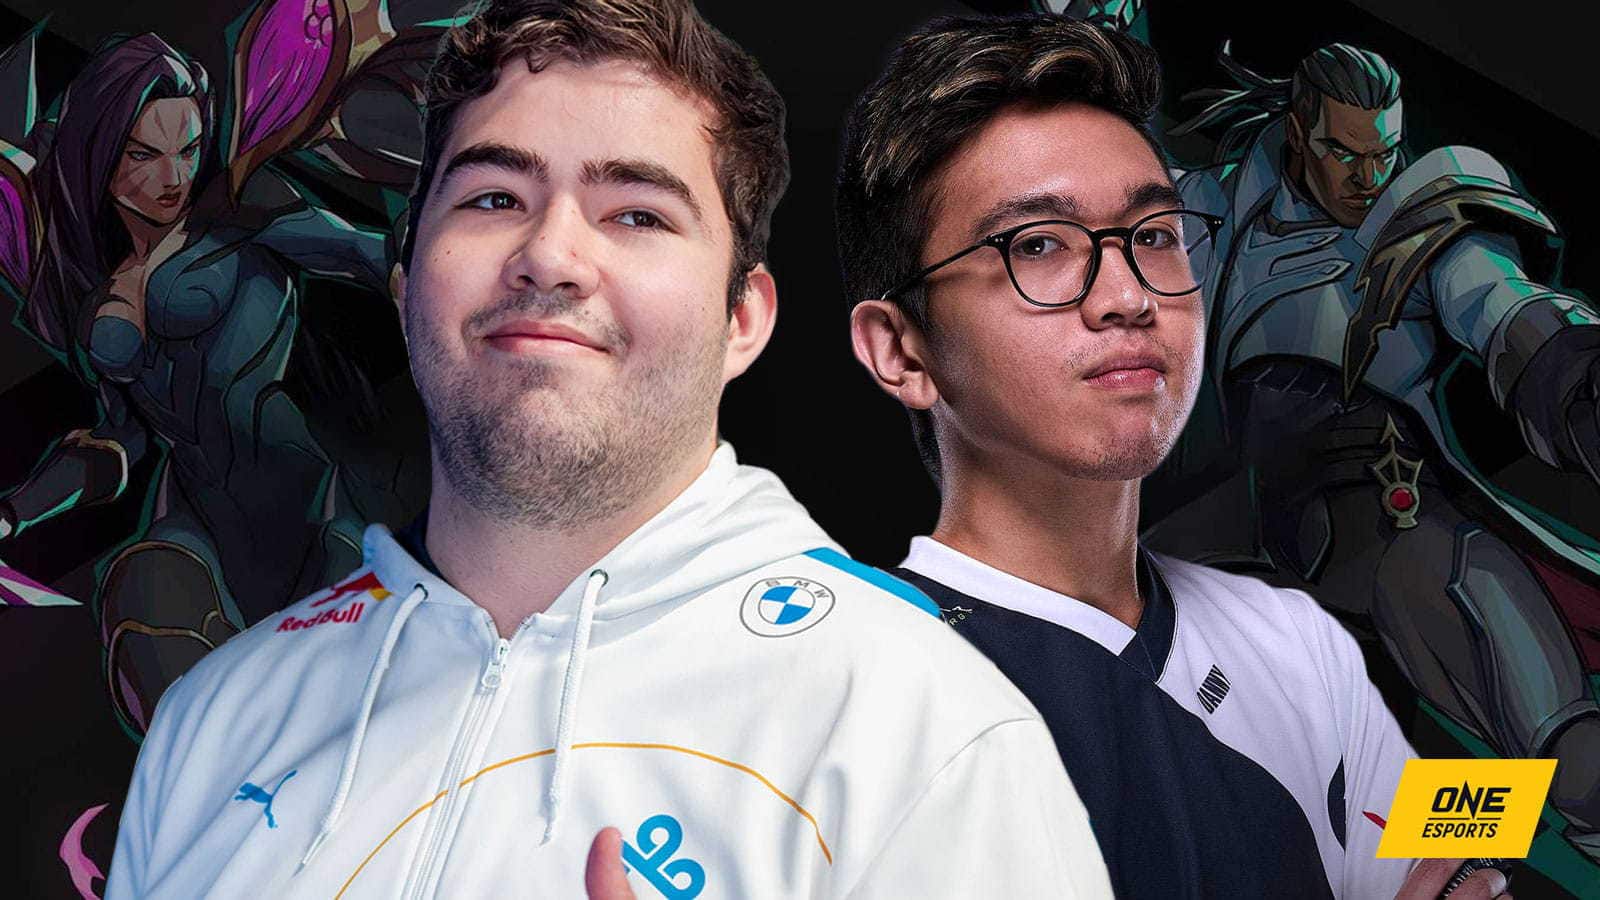 Champions Queue NA: Former pros and streamers currently playing